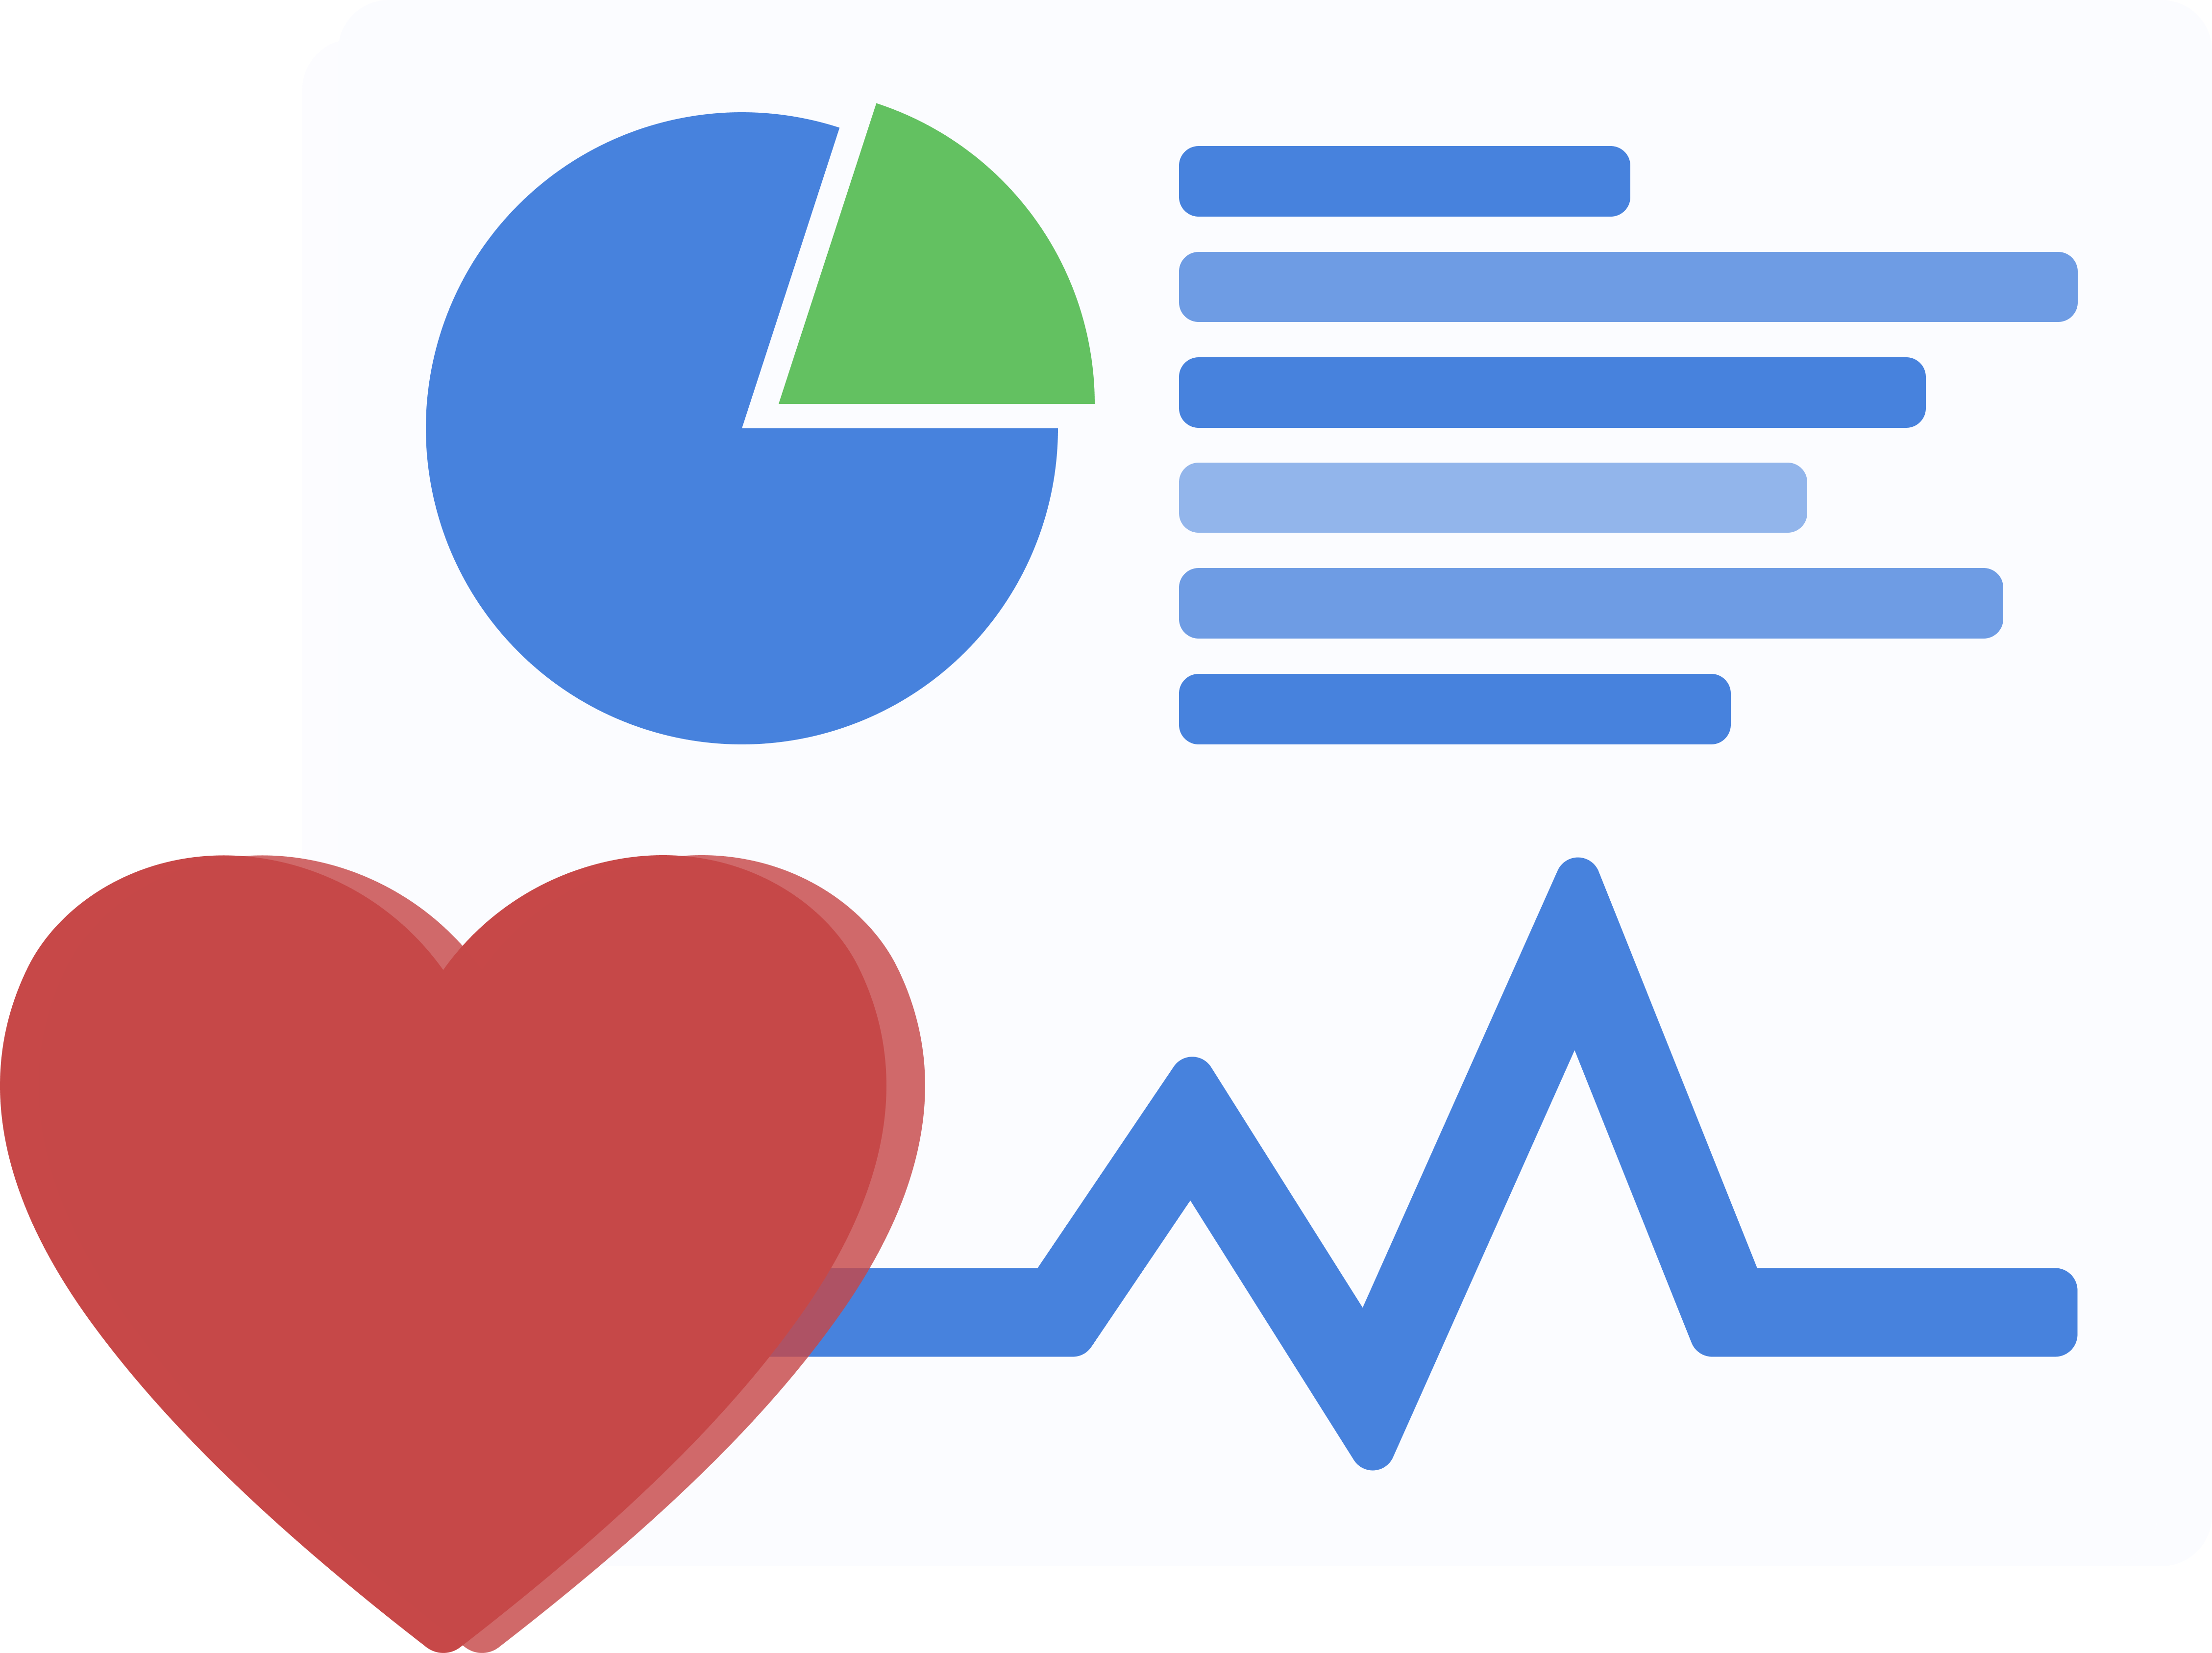 Icon of the paper with graph, heart and pulse